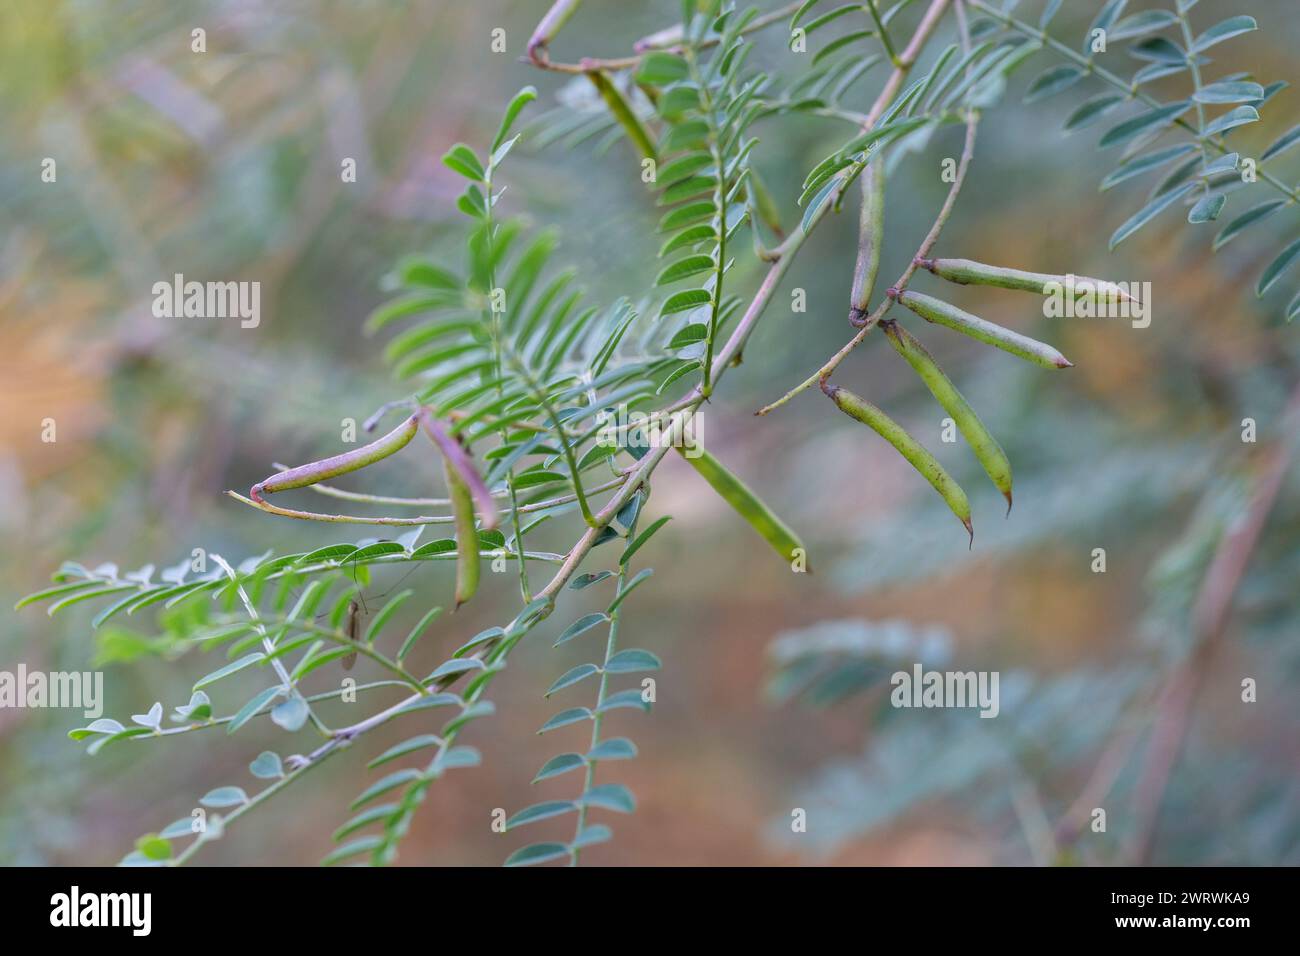 Acacia leaves with a pattern and long green pods with seeds on a blurred background of a garden lawn. Fresh foliage and branches in the park. Summer g Stock Photo